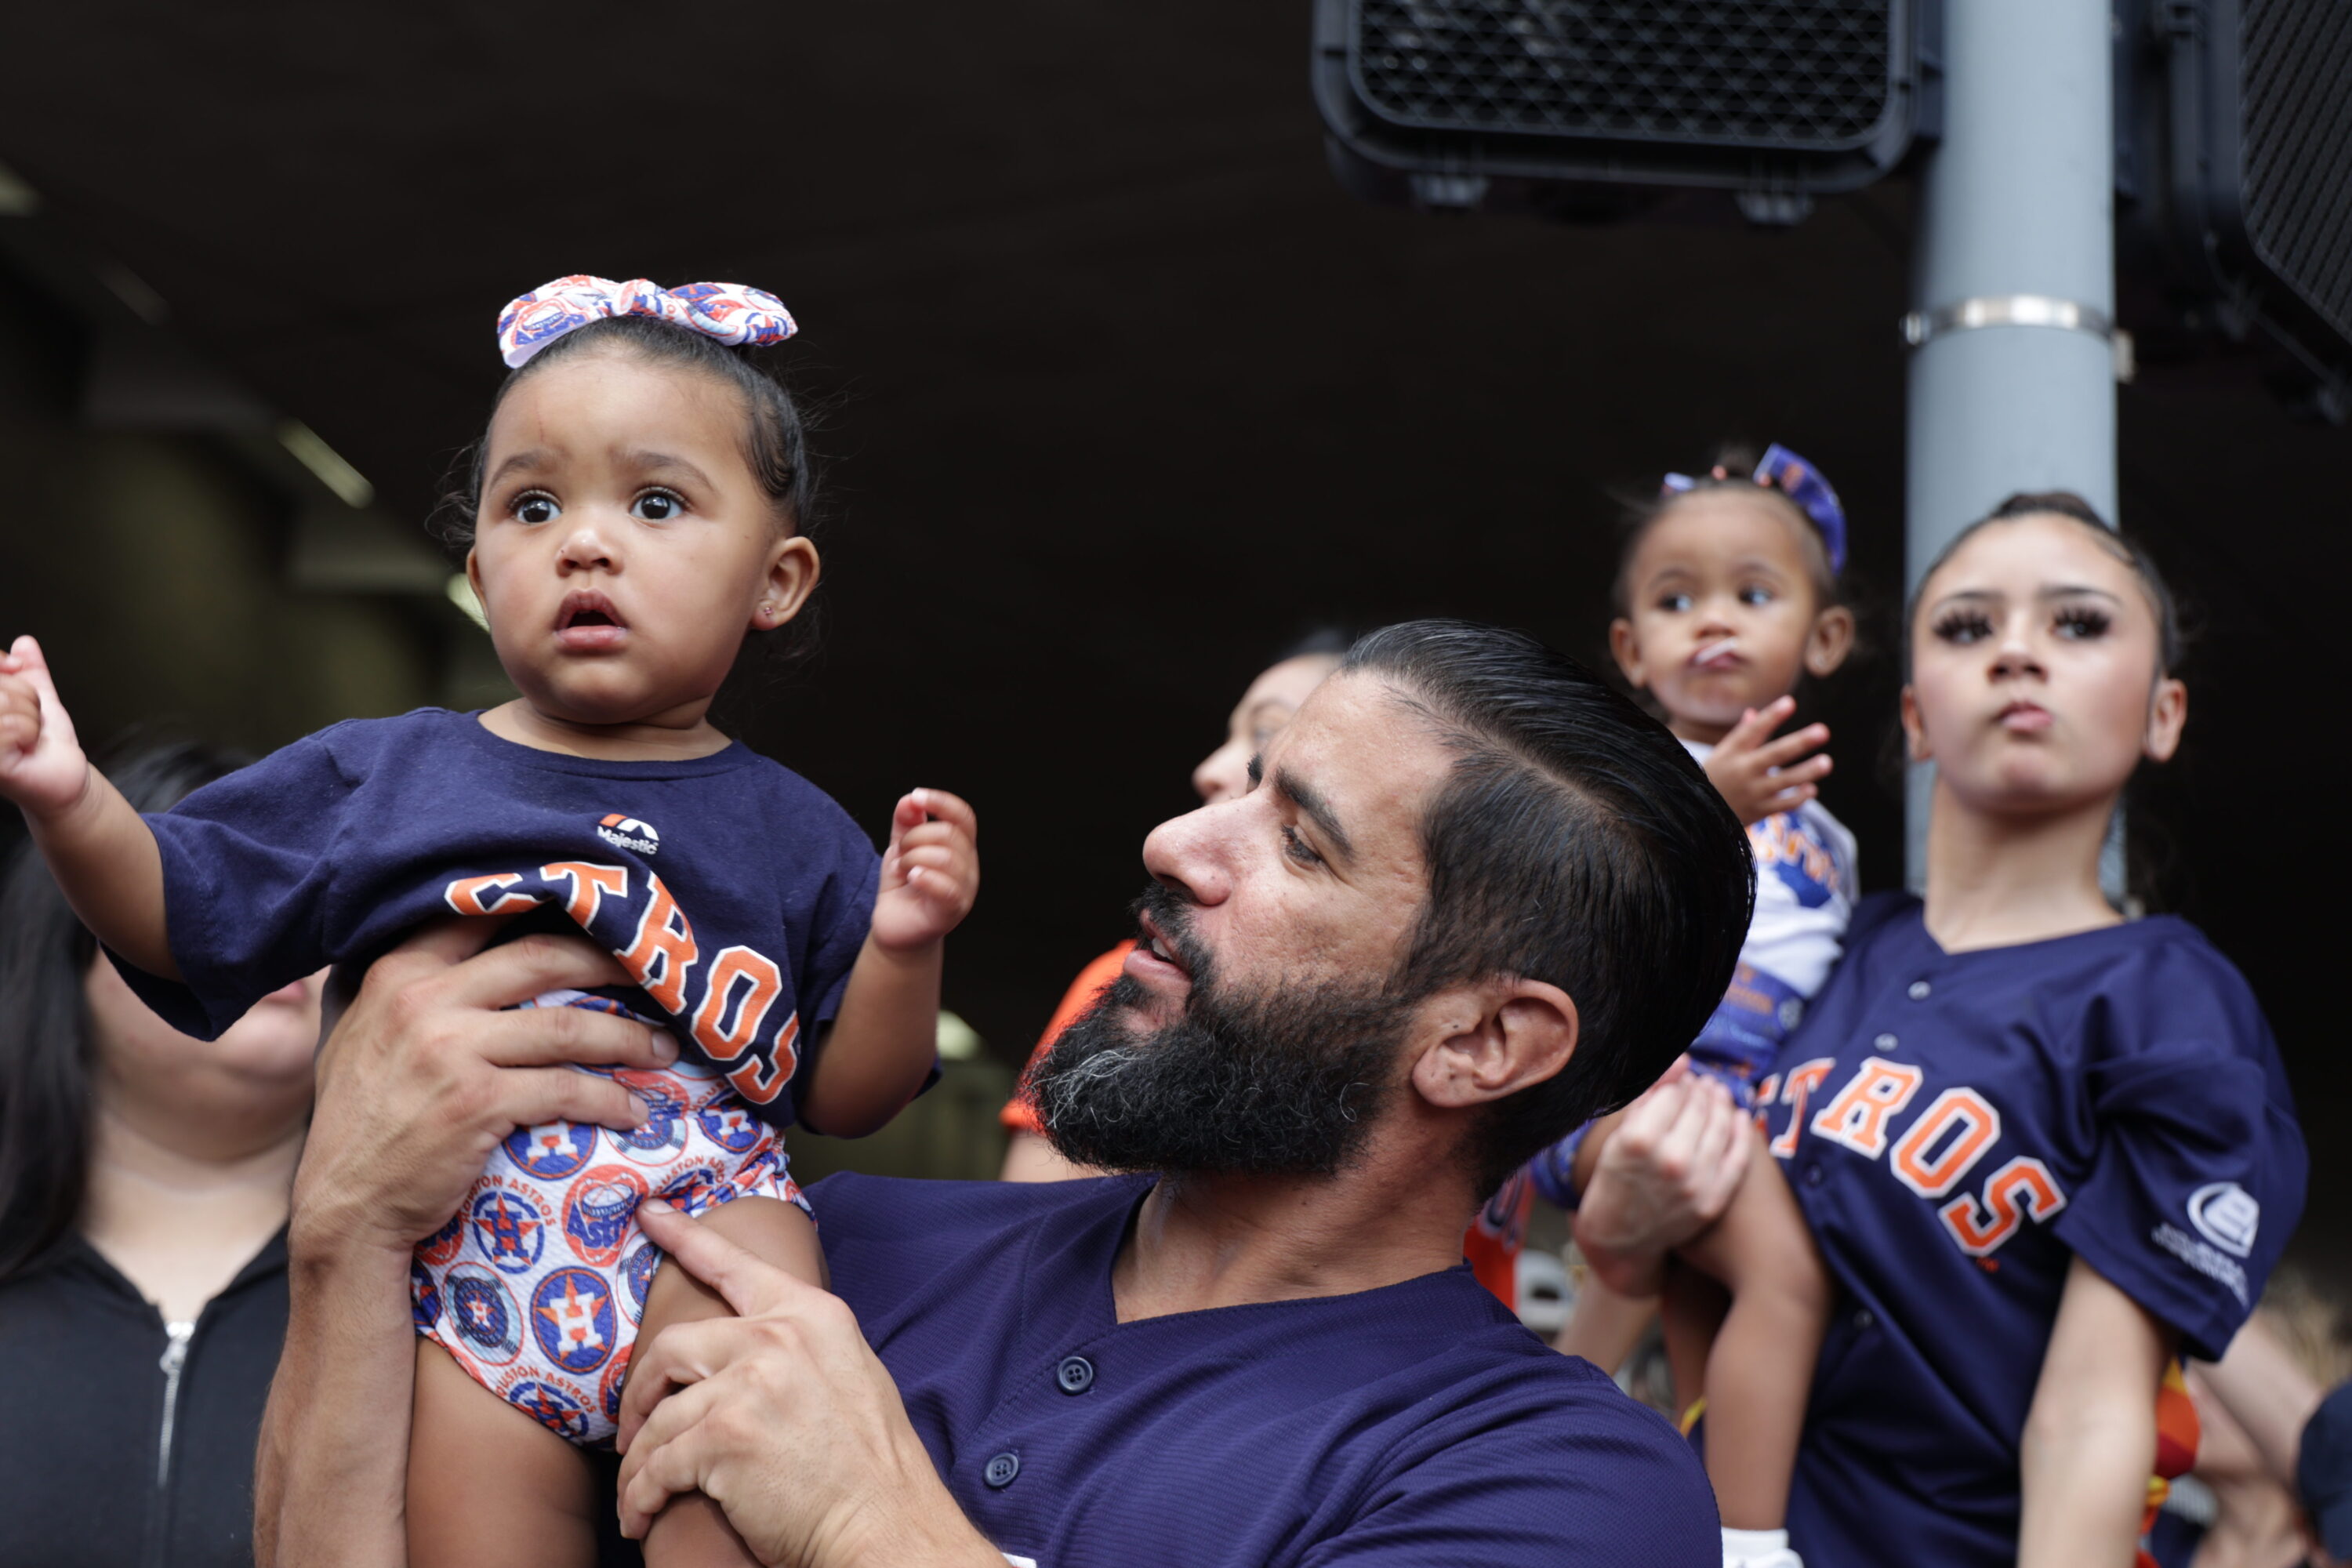 PHOTOS: See the best signs from the Astros' victory parade route